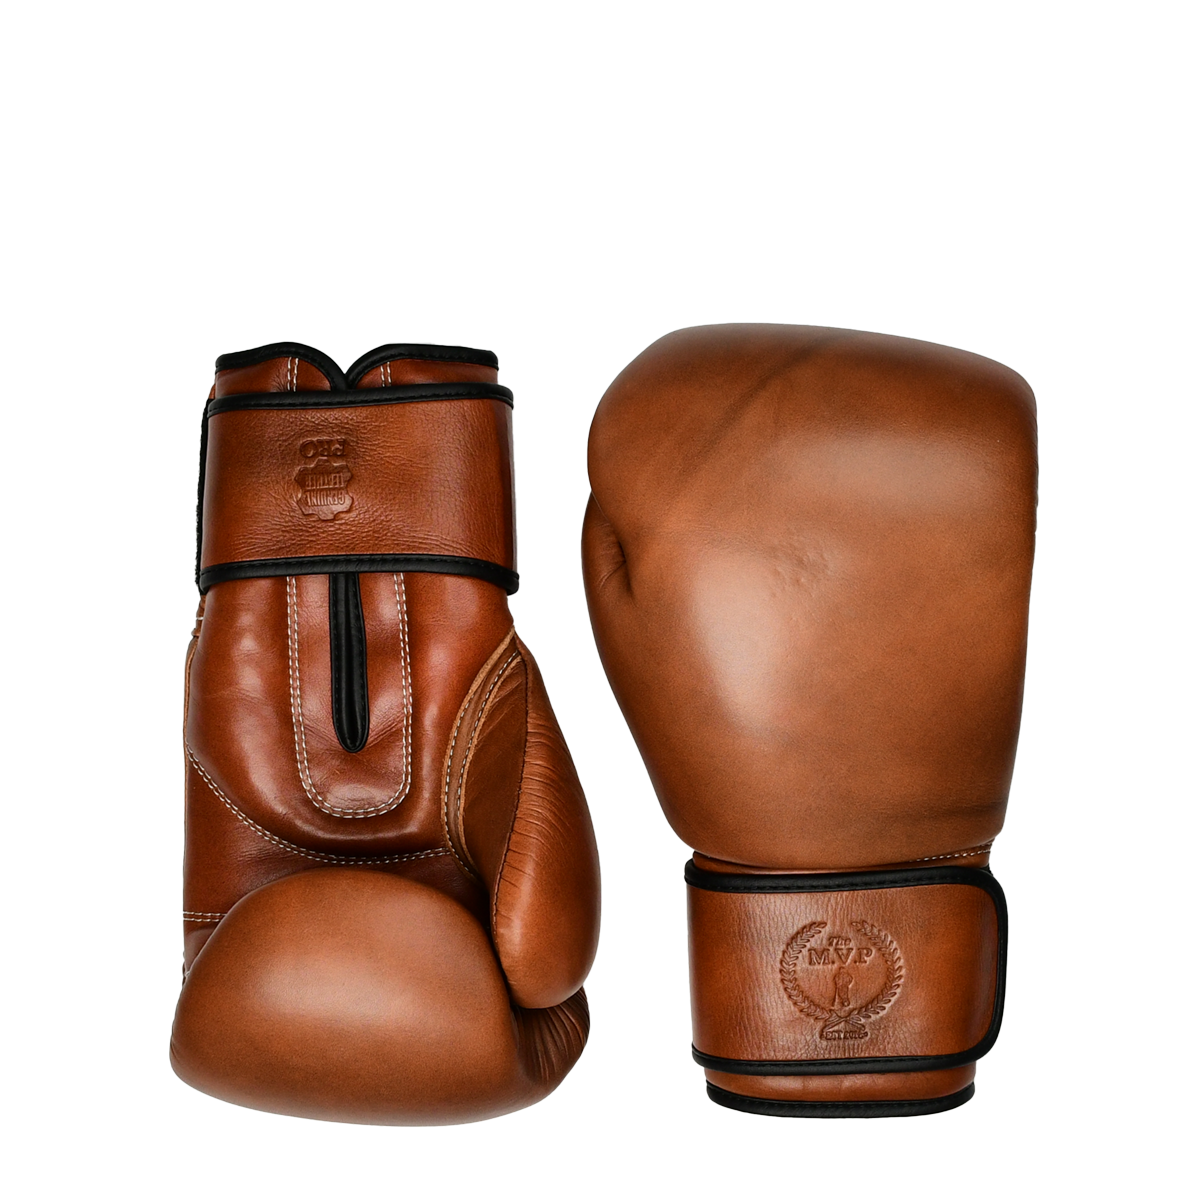 MODEST VINTAGE PLAYER - BOXING GLOVES - BROWN